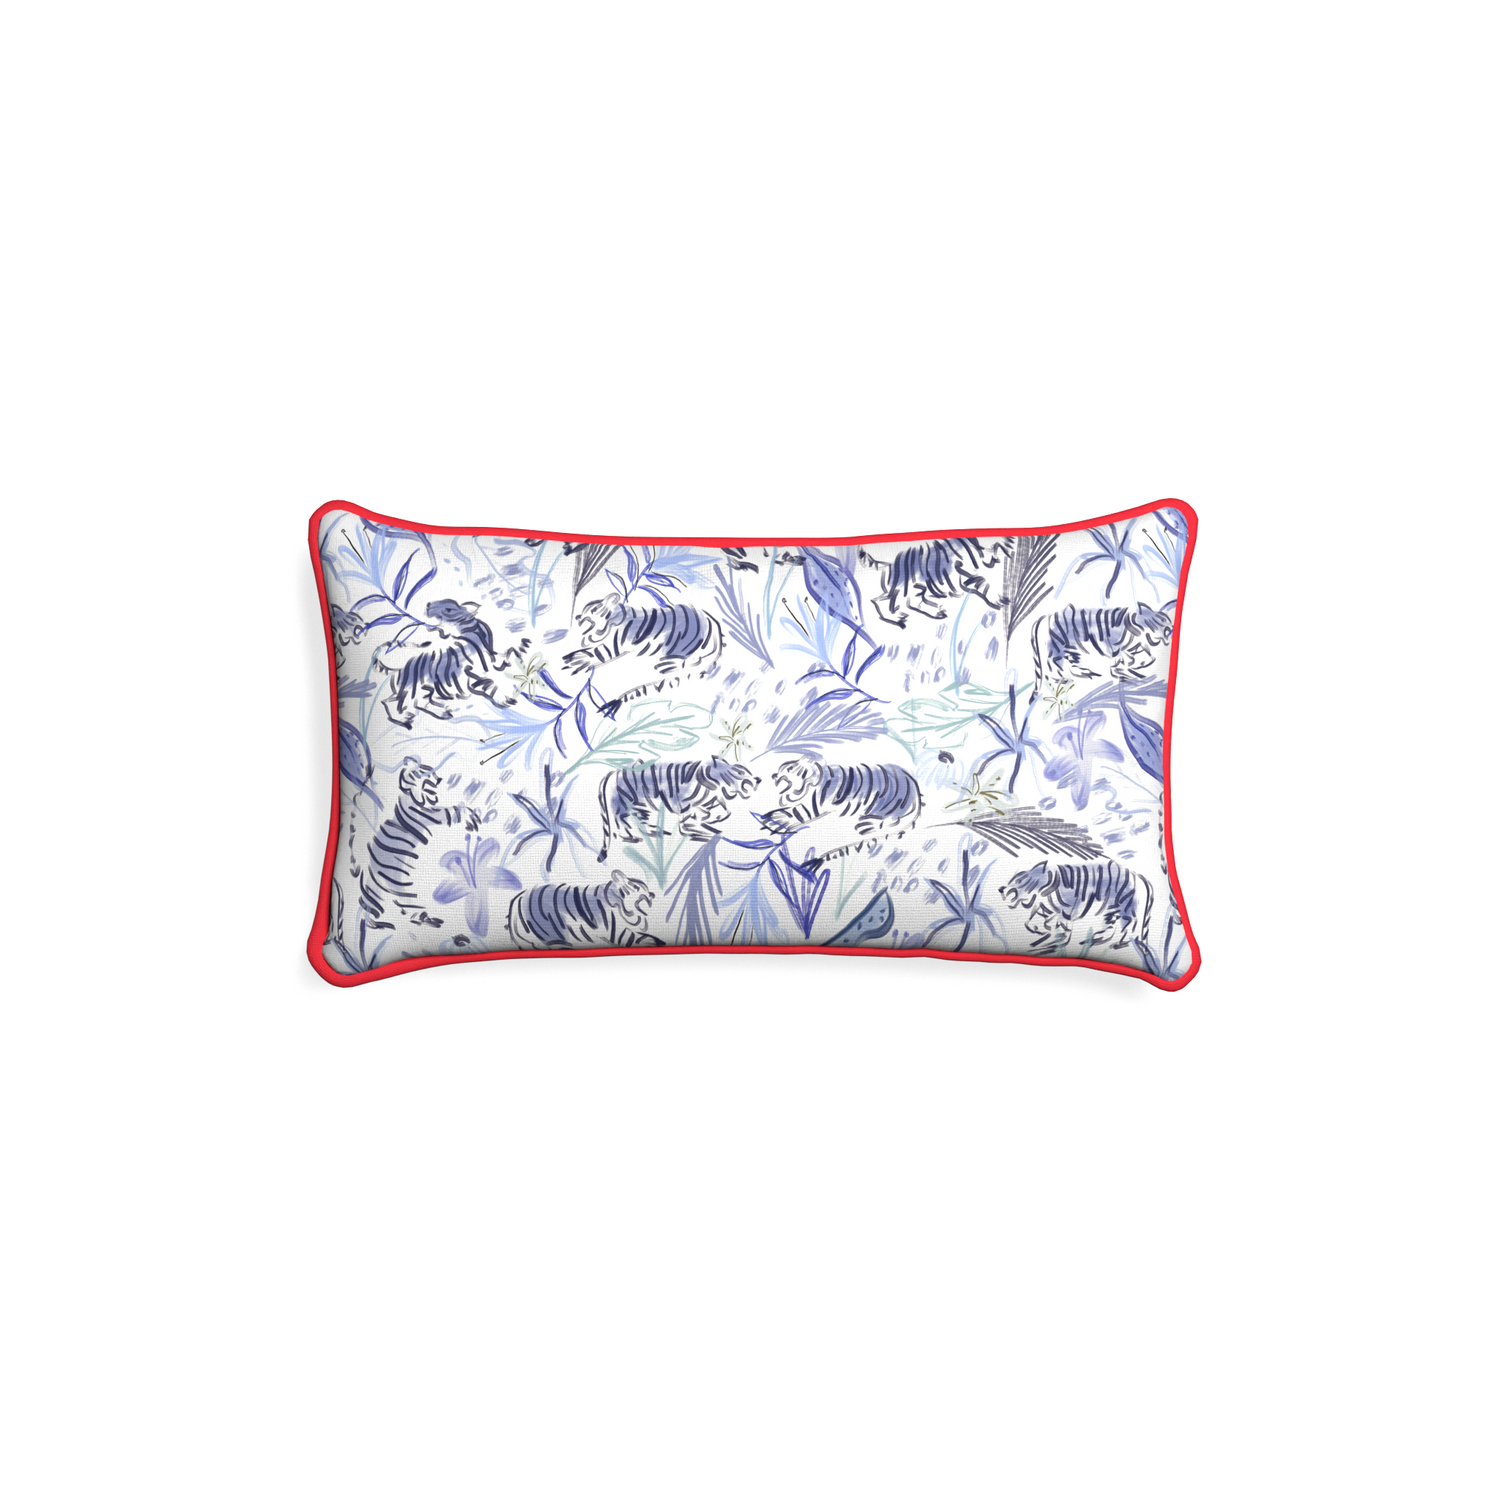 Petite-lumbar frida blue custom blue with intricate tiger designpillow with cherry piping on white background